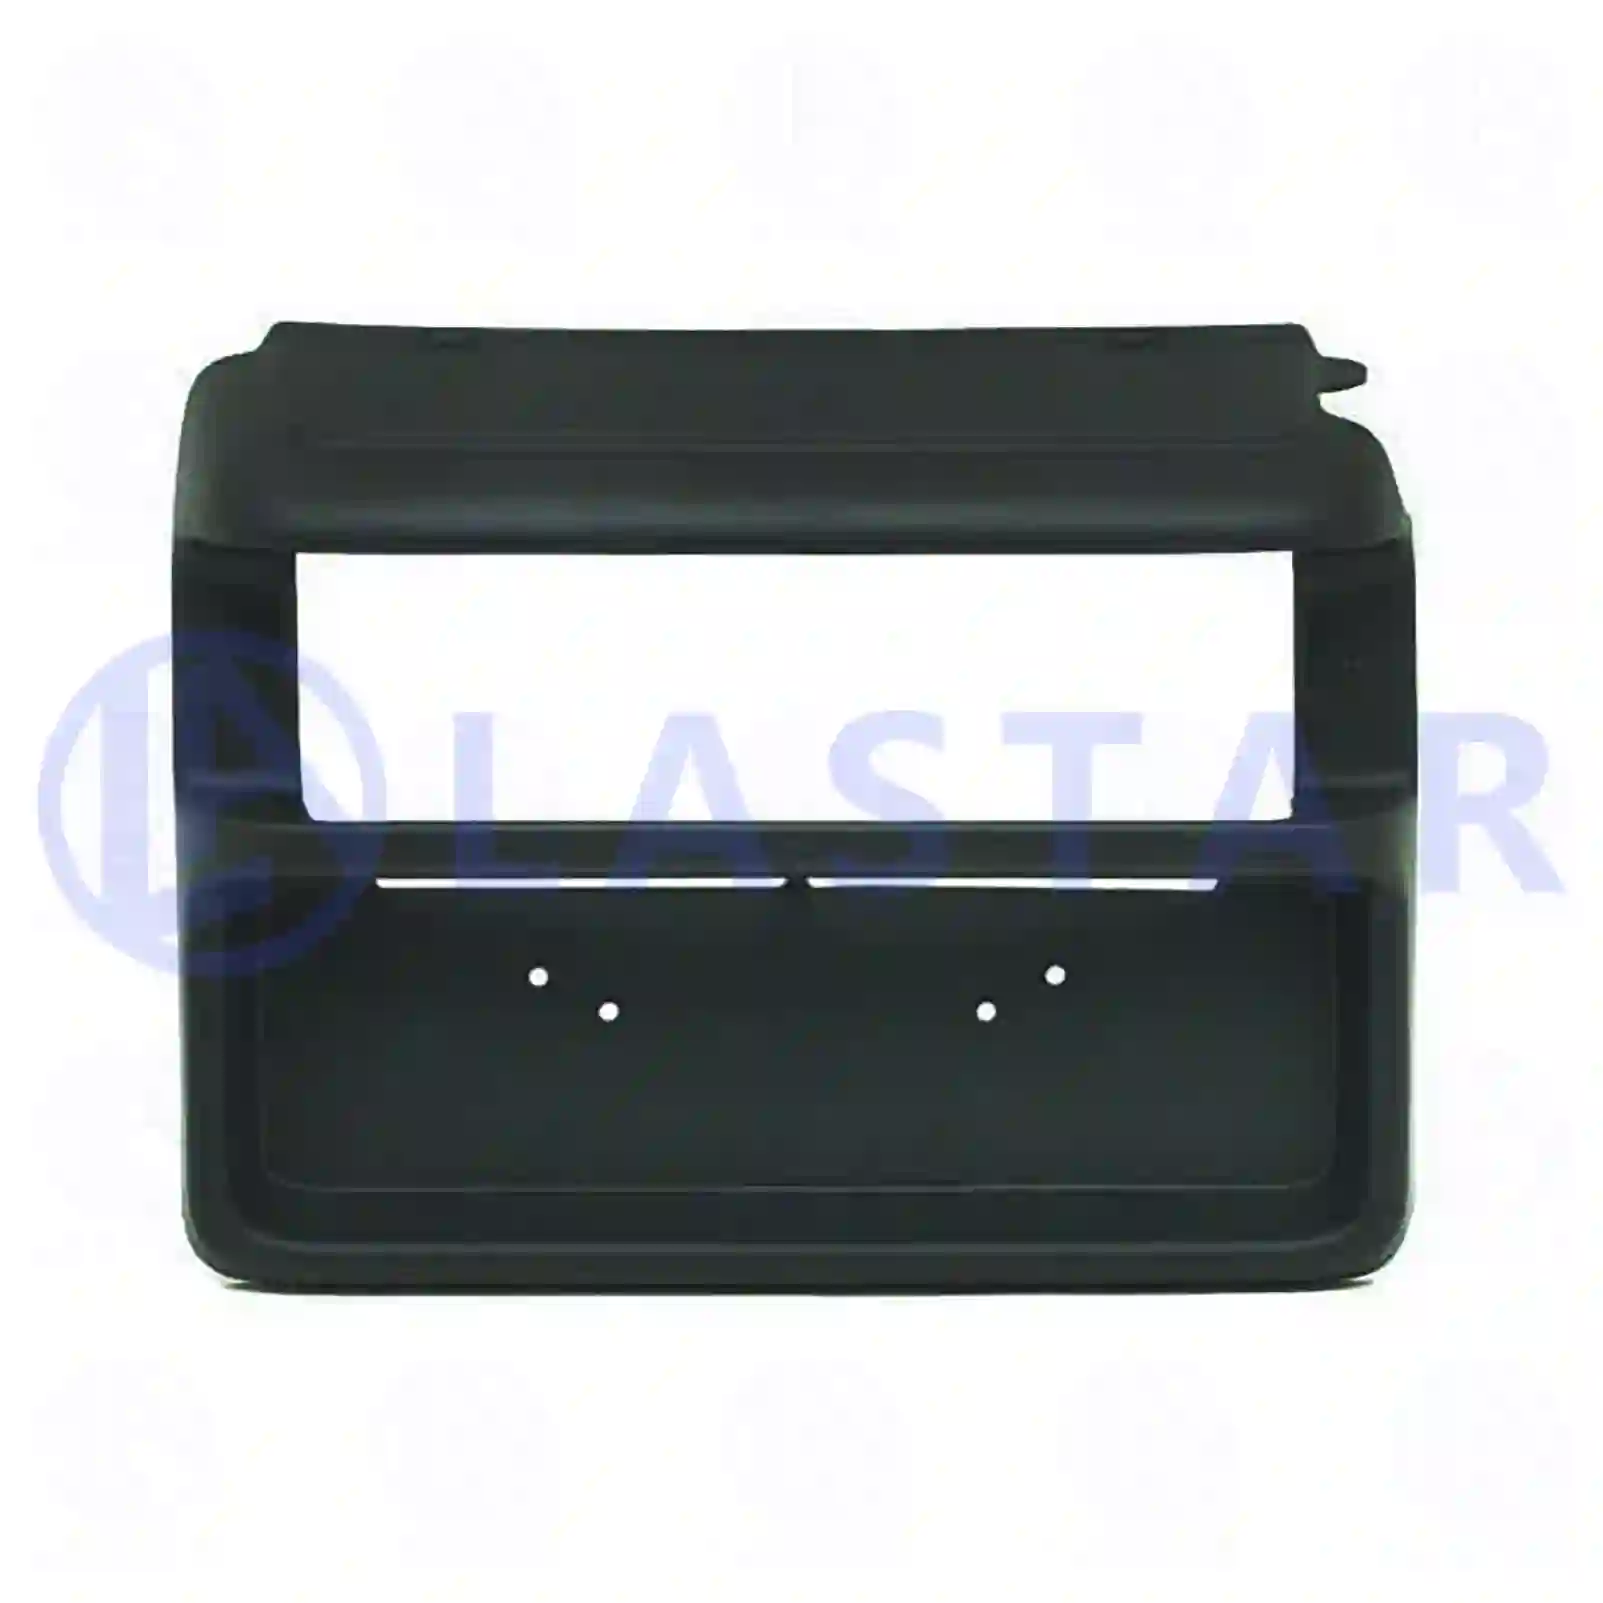 Fender cover, left, 77721514, 1362708, ZG60748-0008 ||  77721514 Lastar Spare Part | Truck Spare Parts, Auotomotive Spare Parts Fender cover, left, 77721514, 1362708, ZG60748-0008 ||  77721514 Lastar Spare Part | Truck Spare Parts, Auotomotive Spare Parts